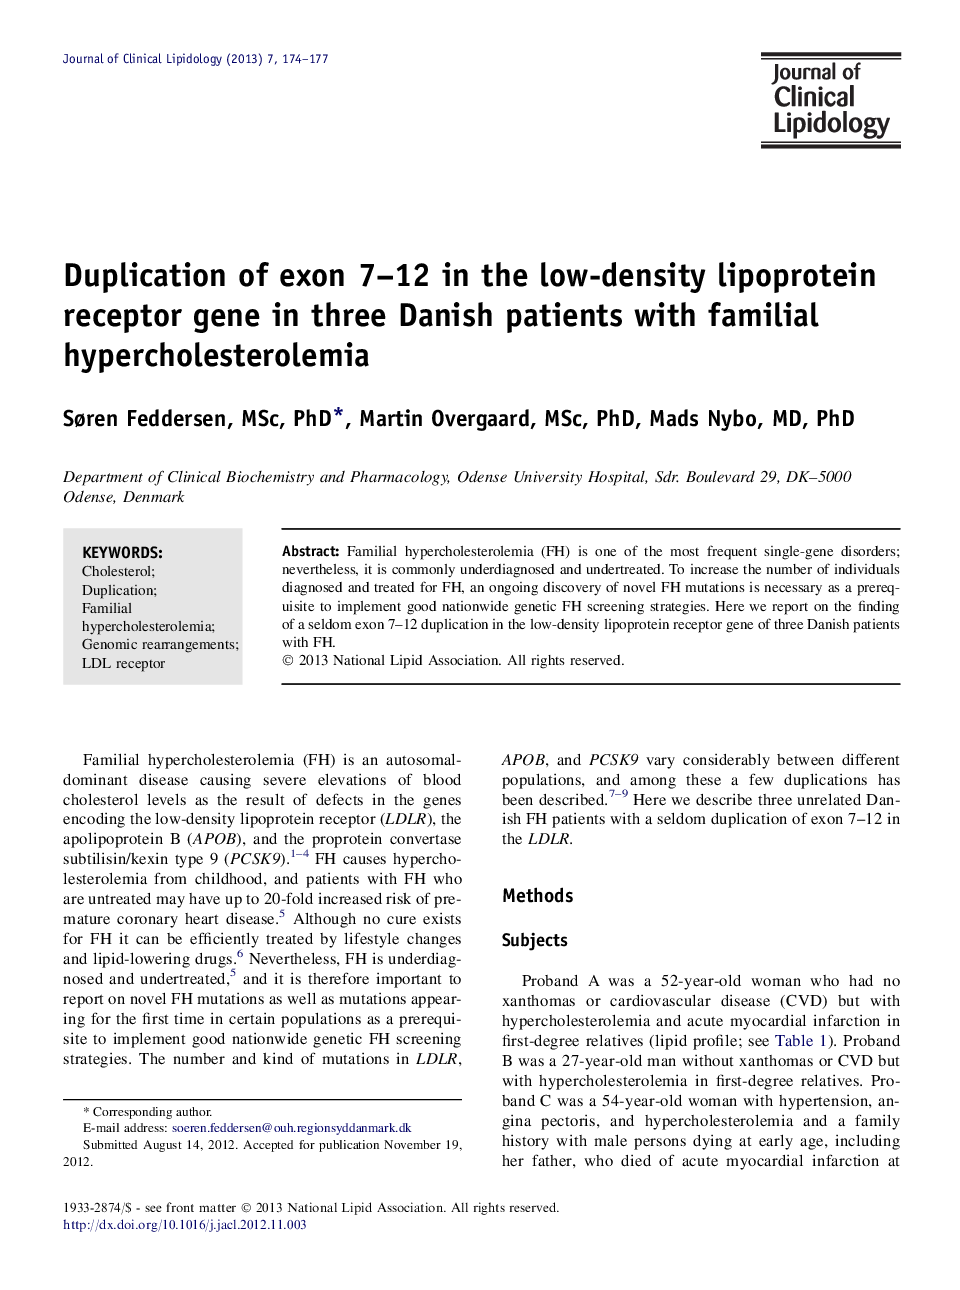 Duplication of exon 7-12 in the low-density lipoprotein receptor gene in three Danish patients with familial hypercholesterolemia